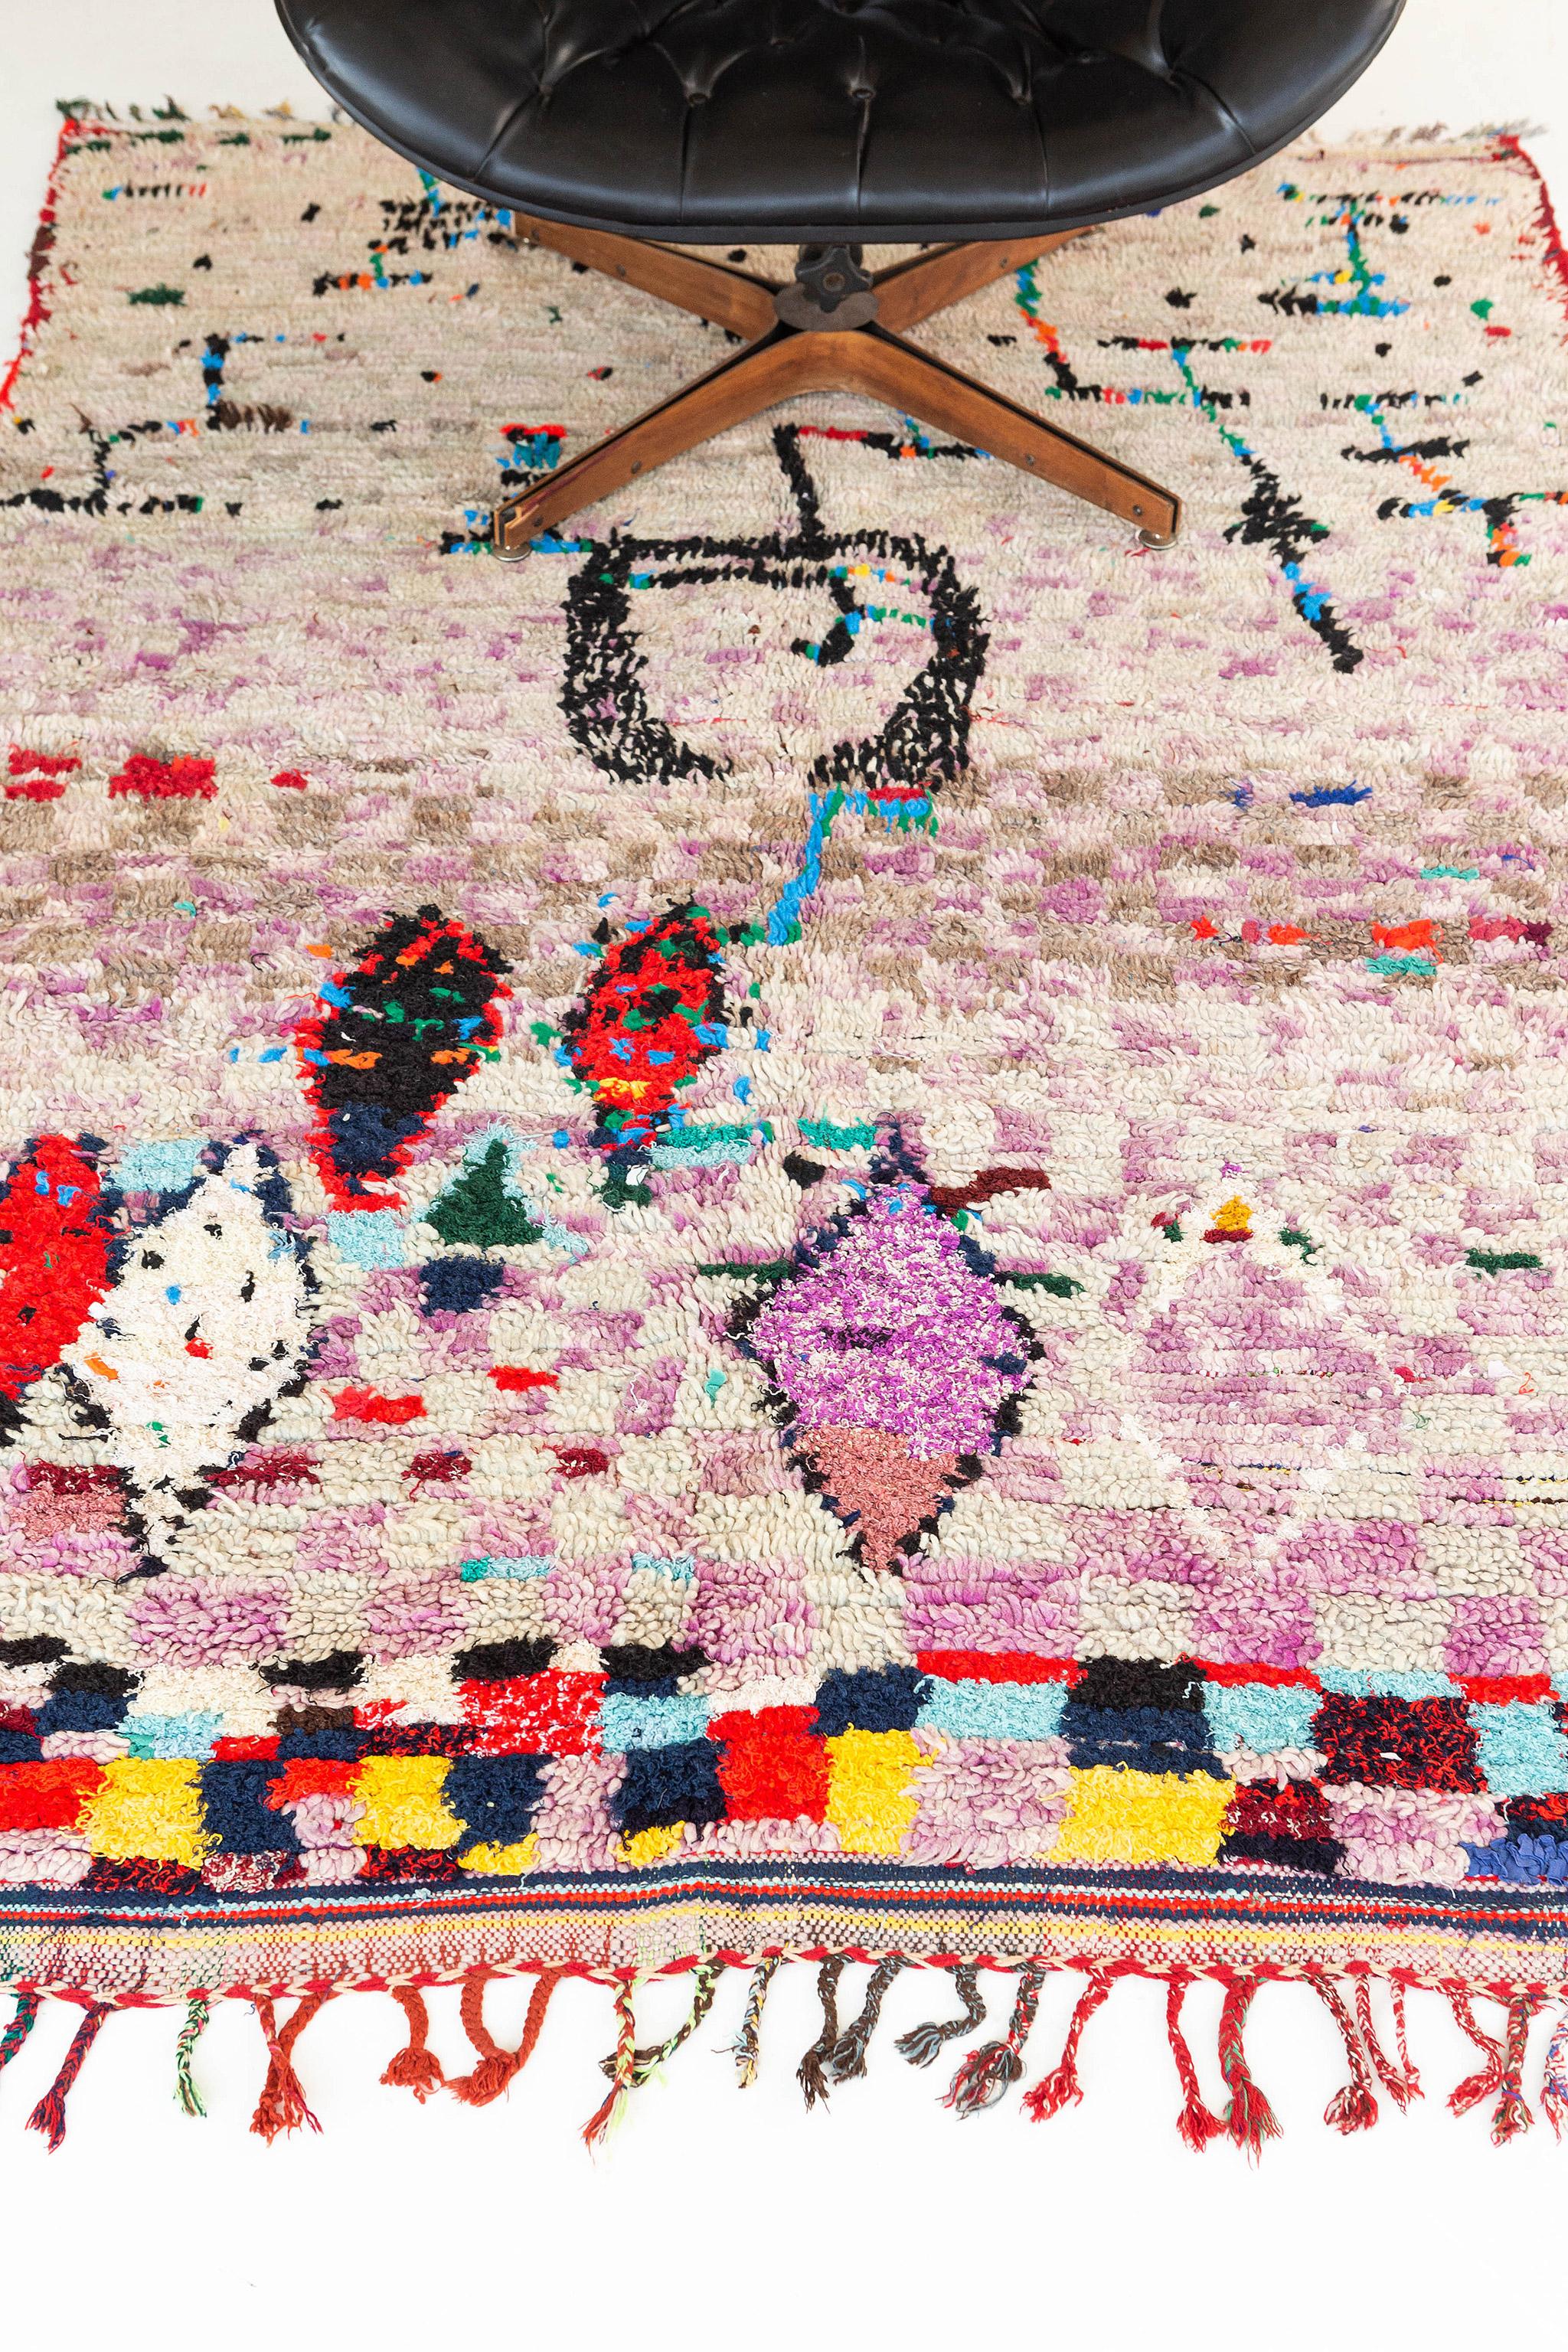 A rug like a painting. Abrash checkerboard ground runs throughout. The main area features alternating magenta-purple and ivory-gray colored squares, the top border introduces a riot of red, yellow, black, and turquoise. Field motifs draw from the